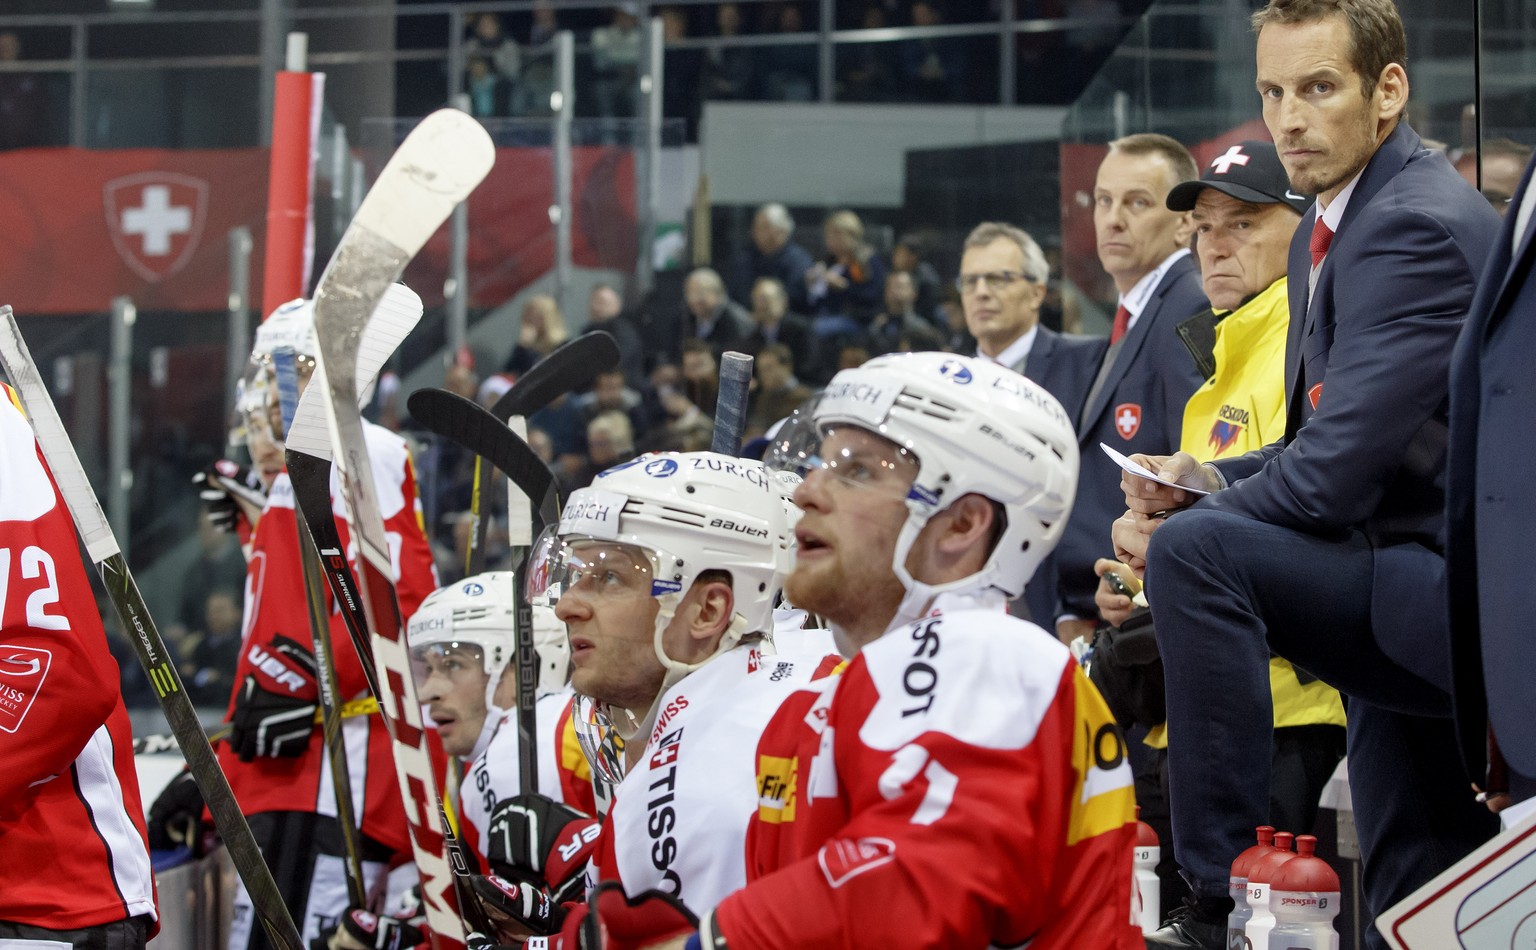 Patrick Fischer, right, head coach of Switzerland national ice hockey team, looks his players, during a friendly international ice hockey game between Switzerland and Canada, at the ice stadium Les Ve ...